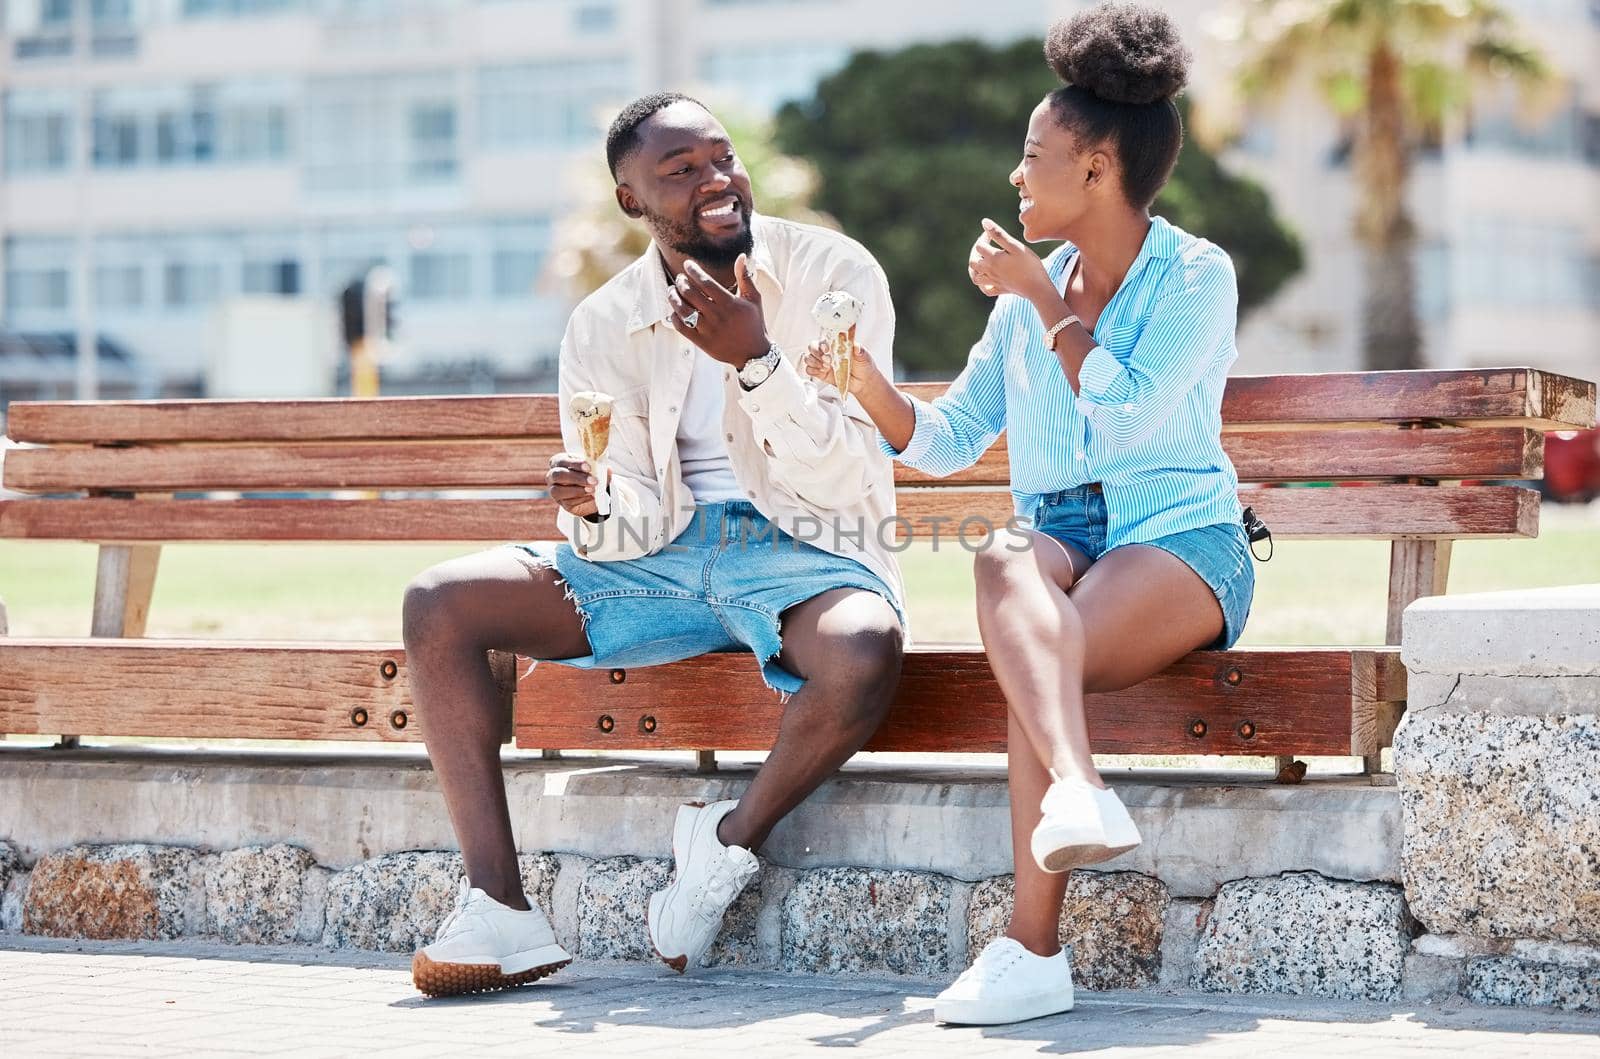 Happy black couple eating ice cream on a beach bench together, smiling while bonding and laughing. Young African American man and woman enjoying their summer romance, free time and relationship.